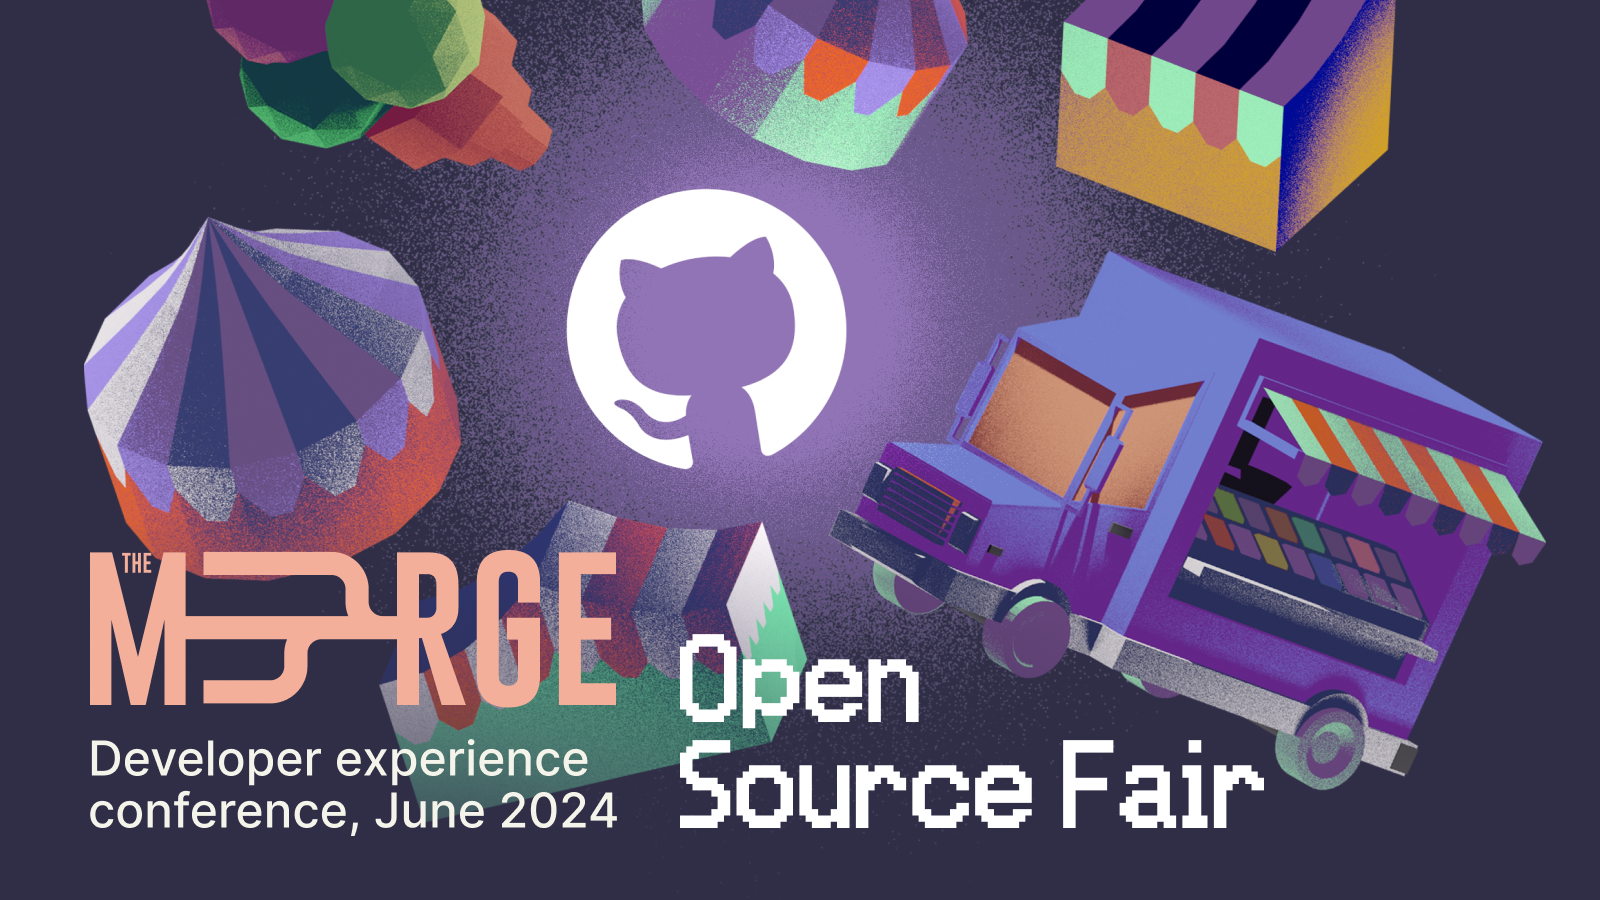 Showcase your open source projects in Berlin this summer